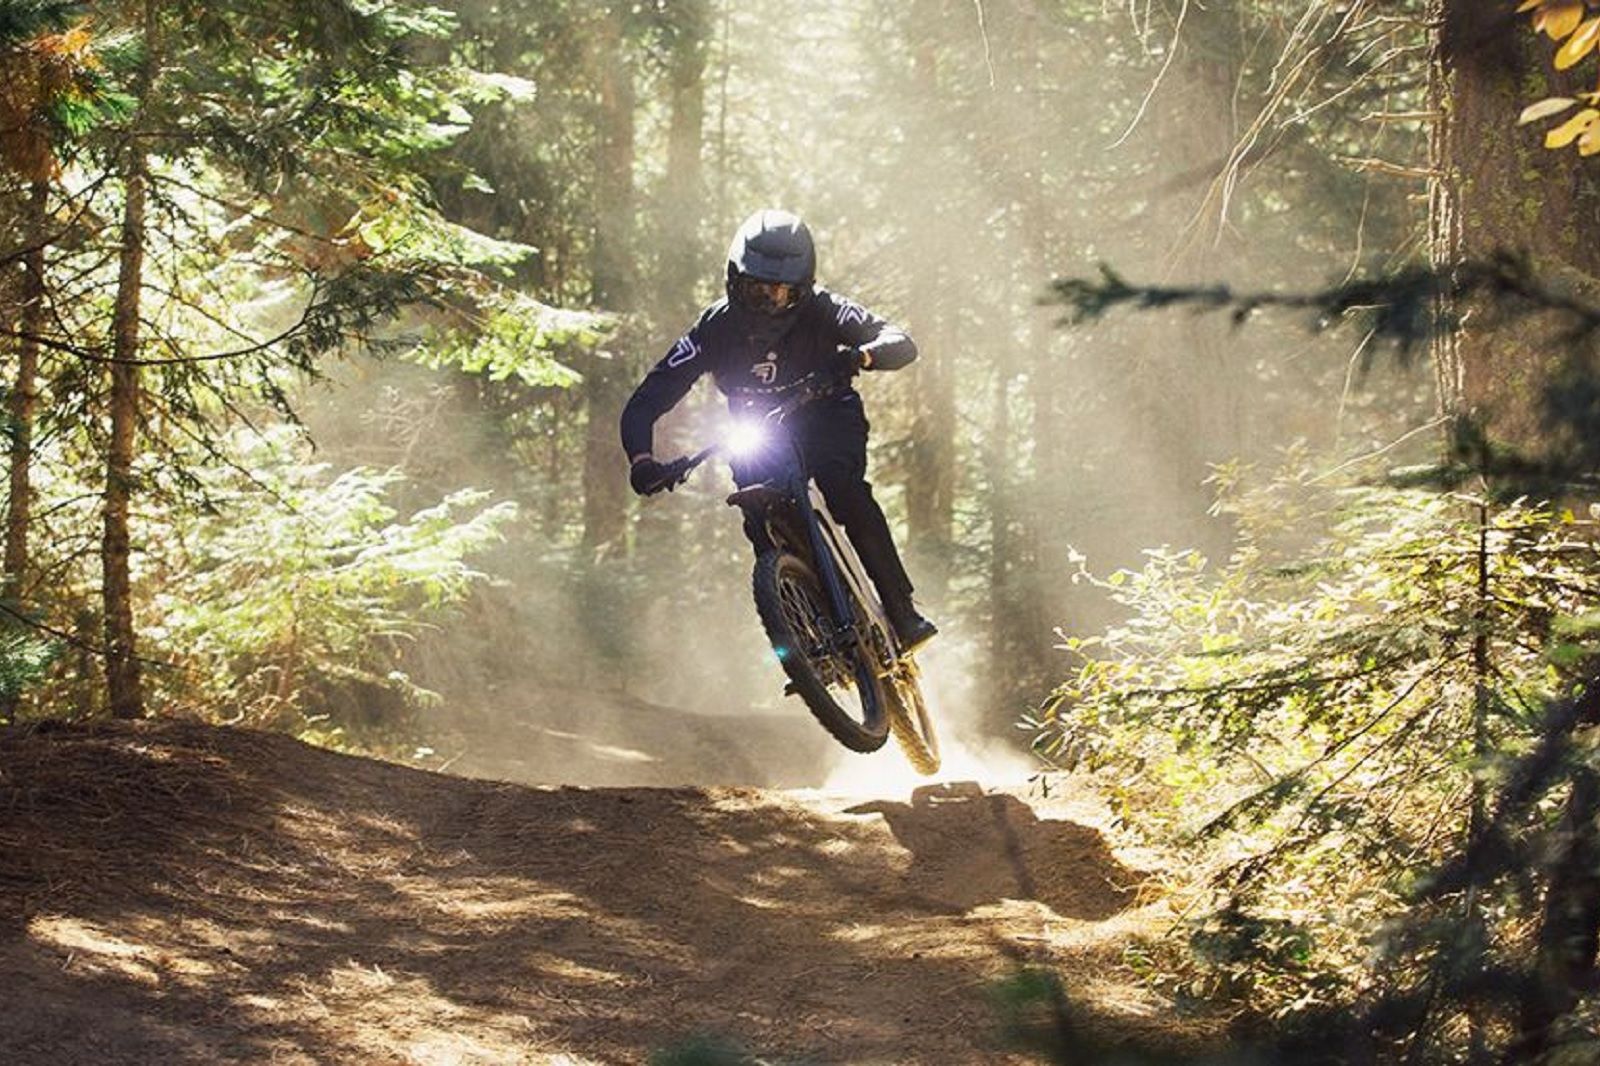 Segway is going off-road with an Dirt eBike image 1